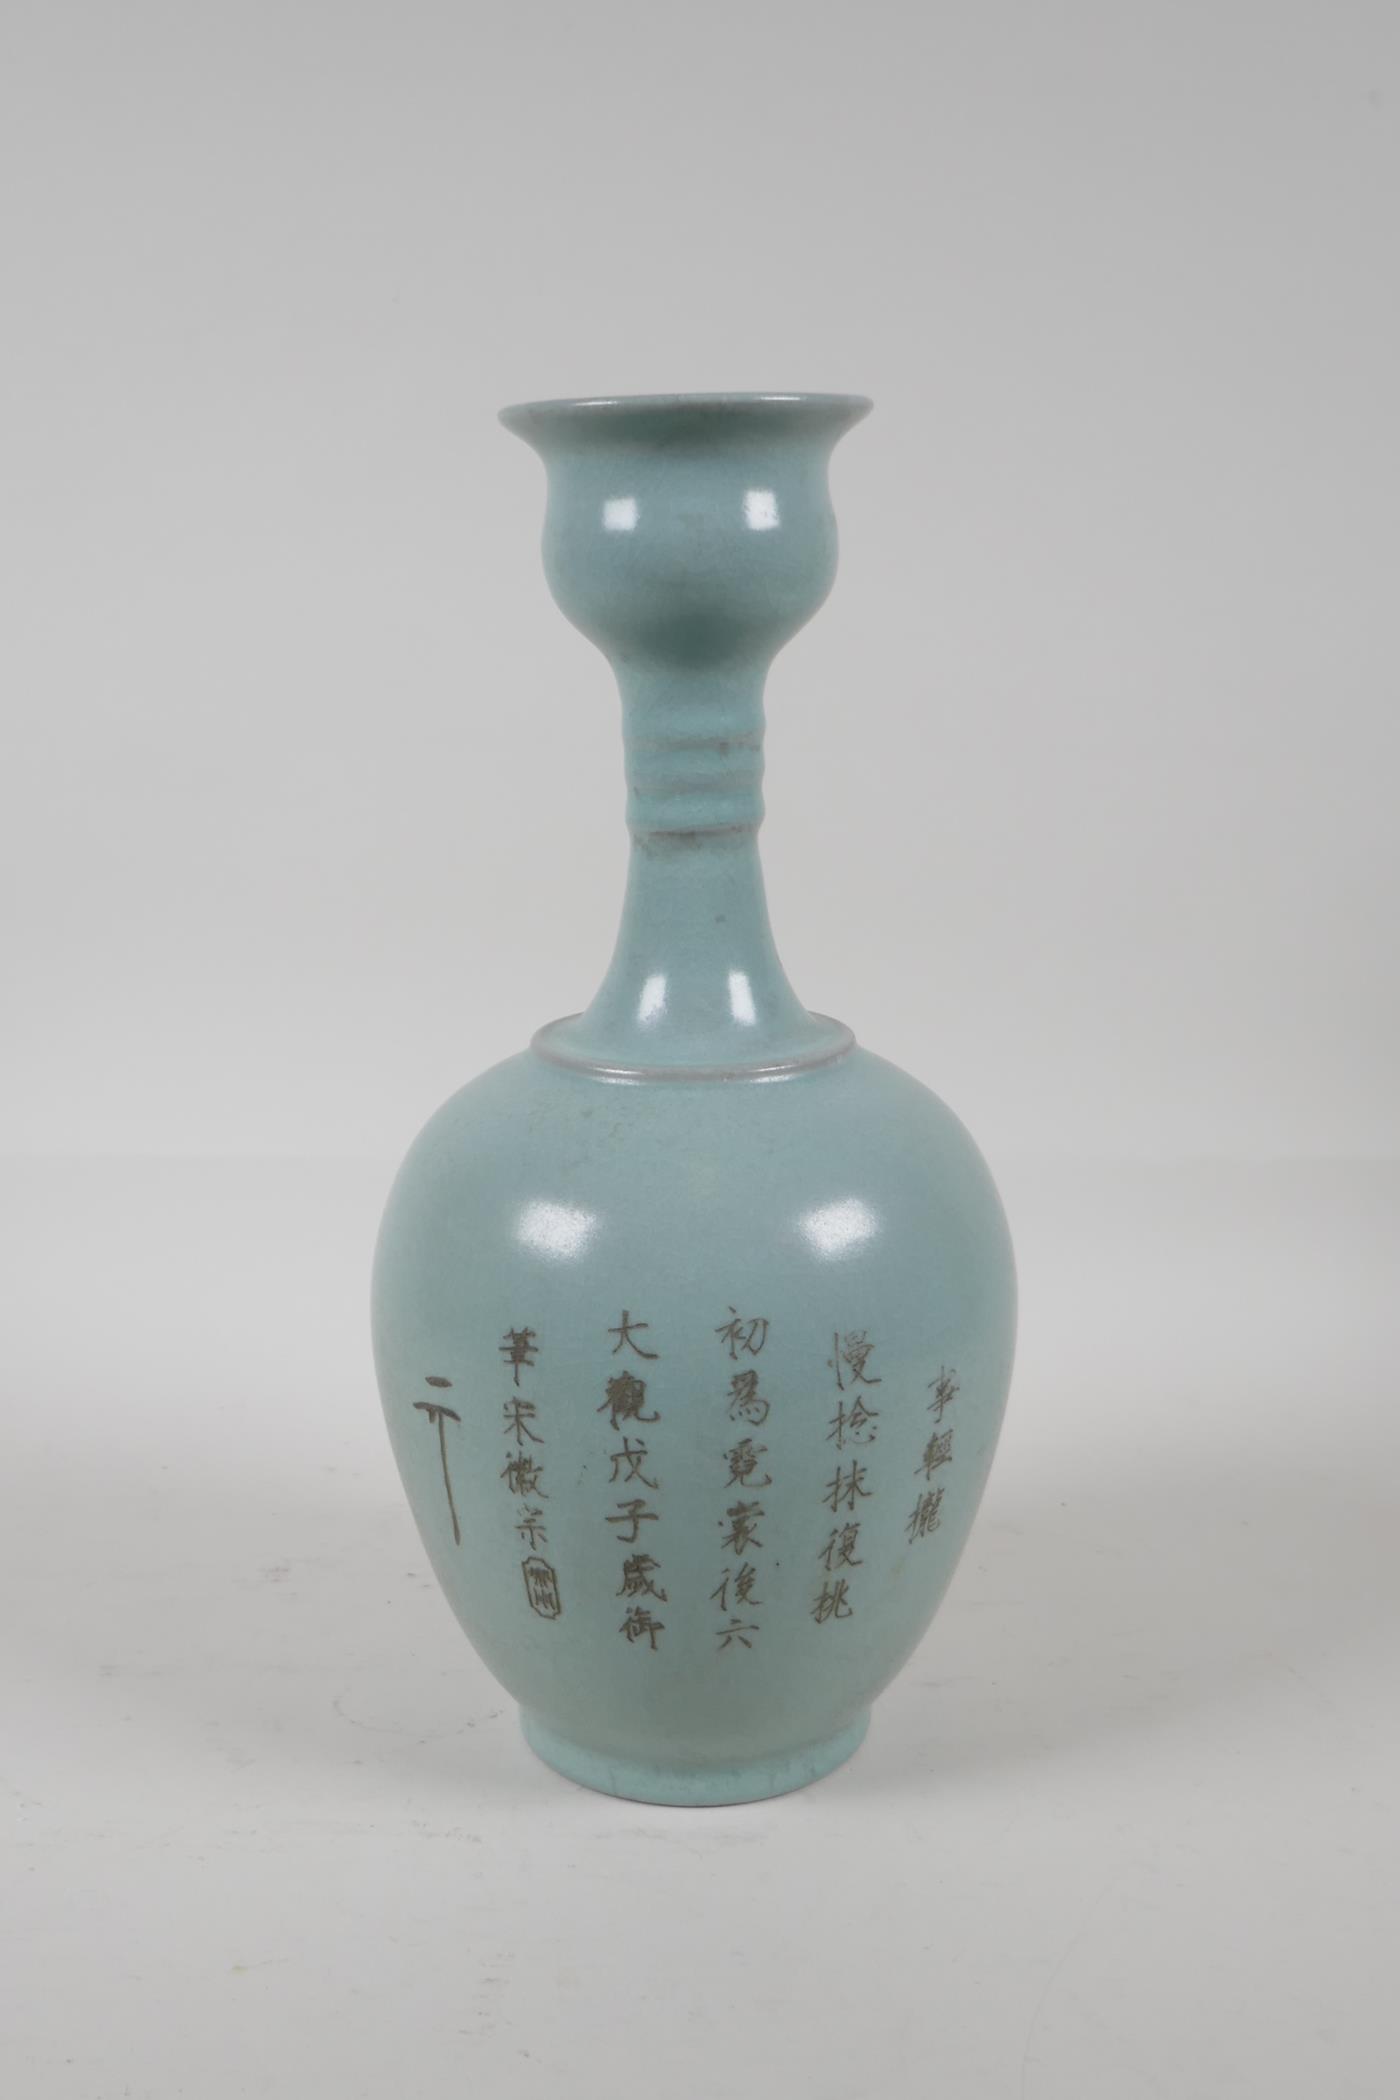 A celadon Ru ware style porcelain vase with engraved character inscription, 11" high - Image 2 of 4